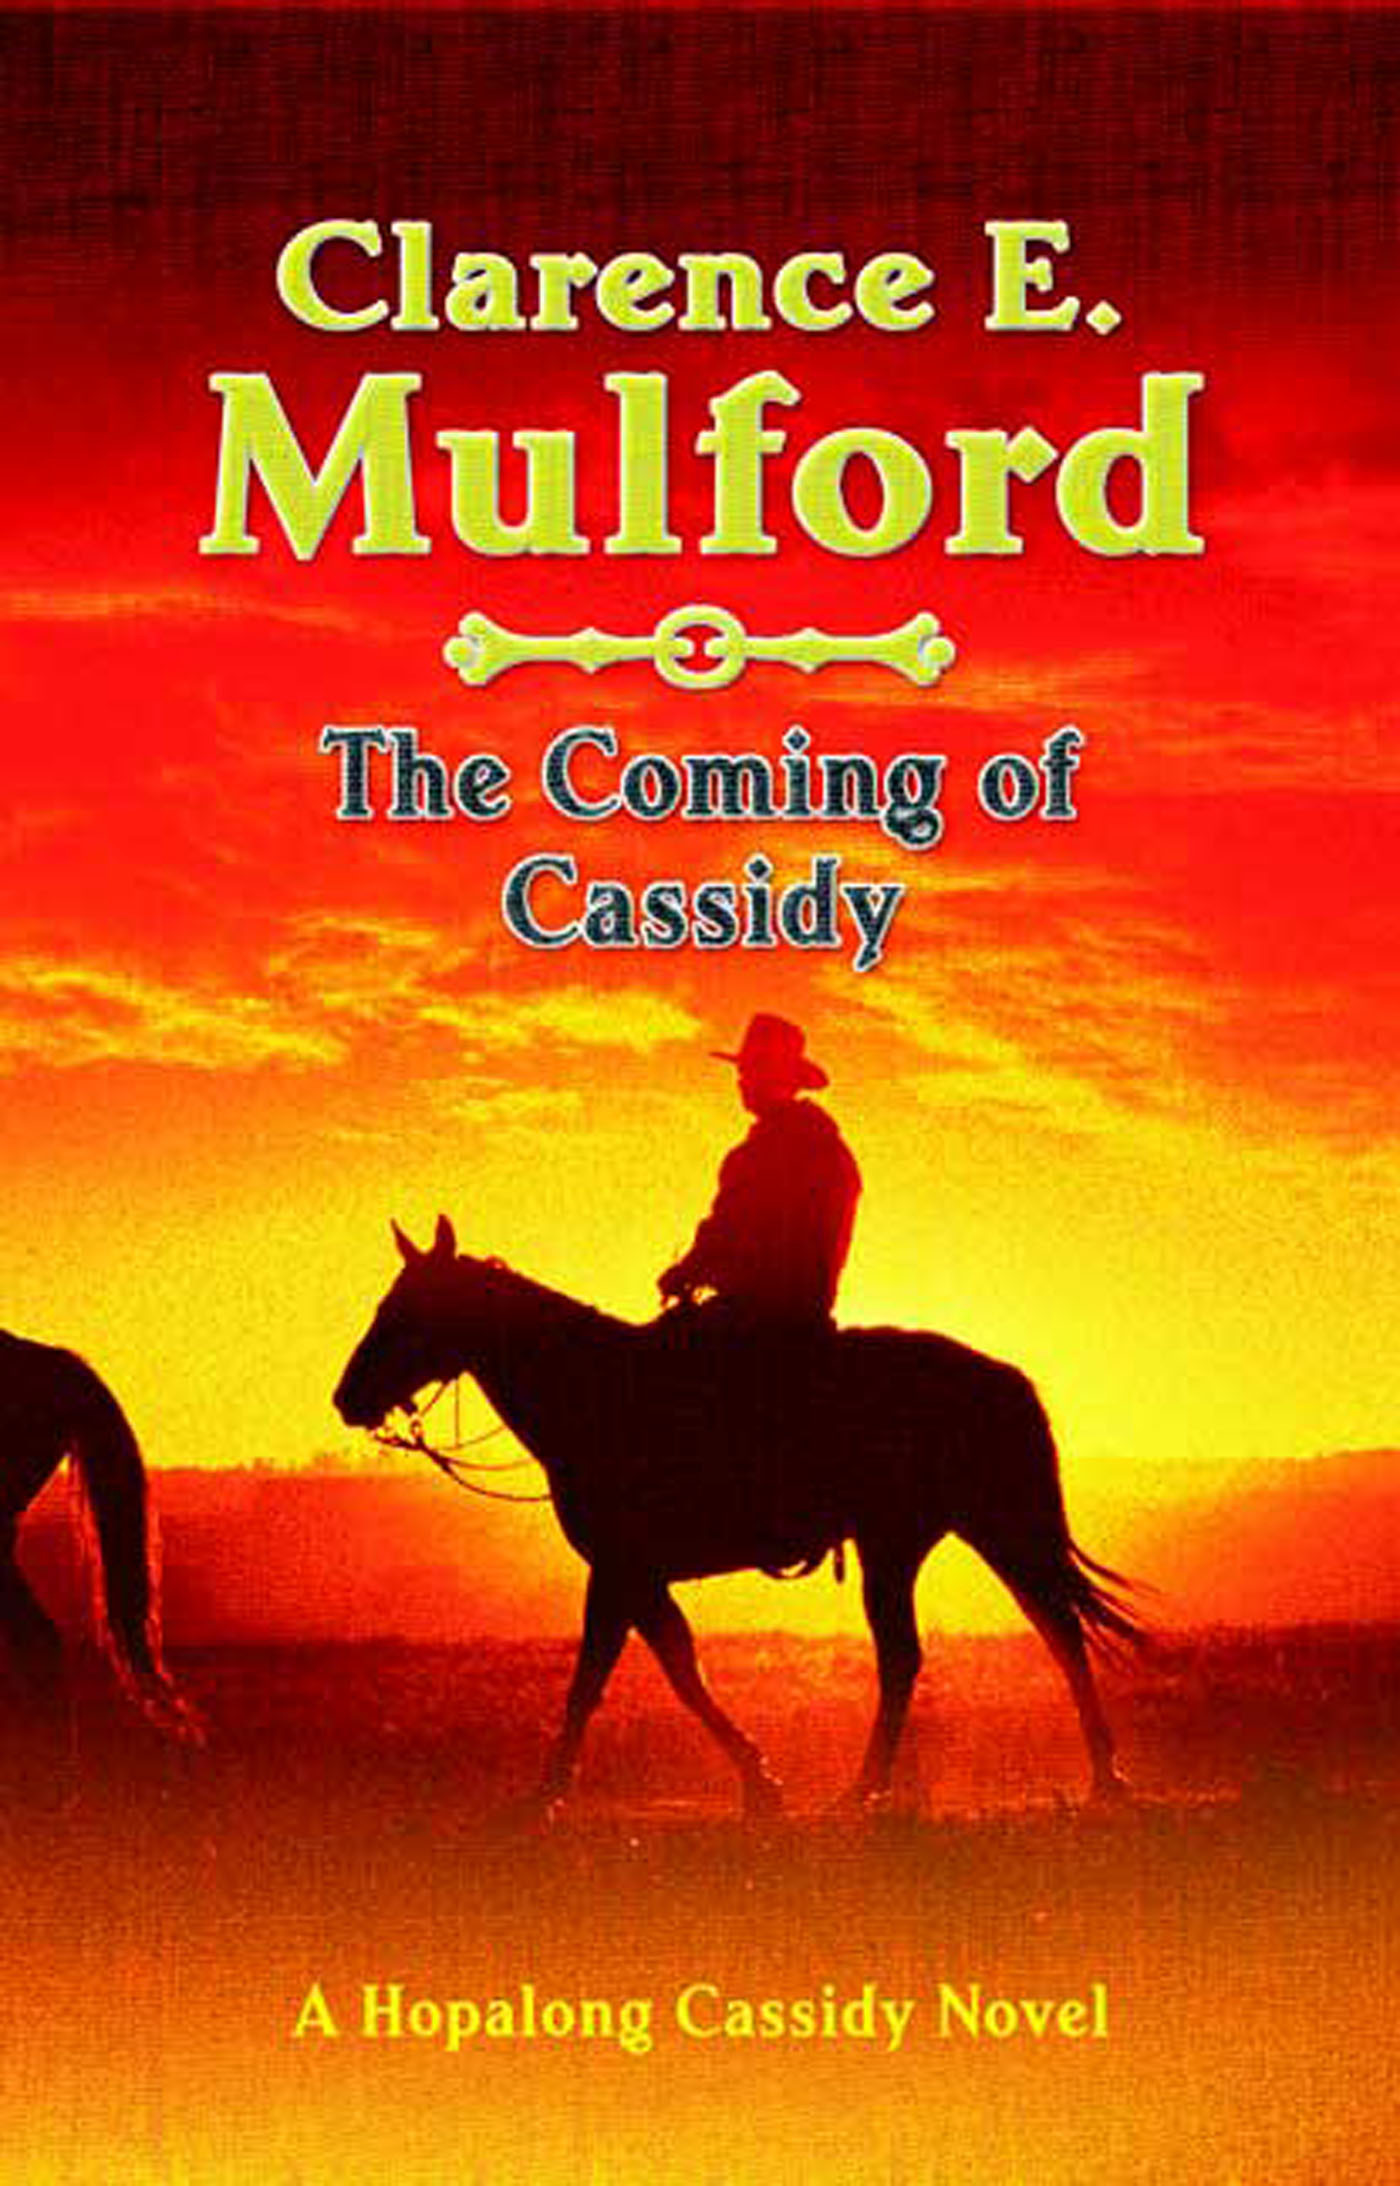 The Coming of Cassidy : A Hopalong Cassidy Novel by Clarence E. Mulford